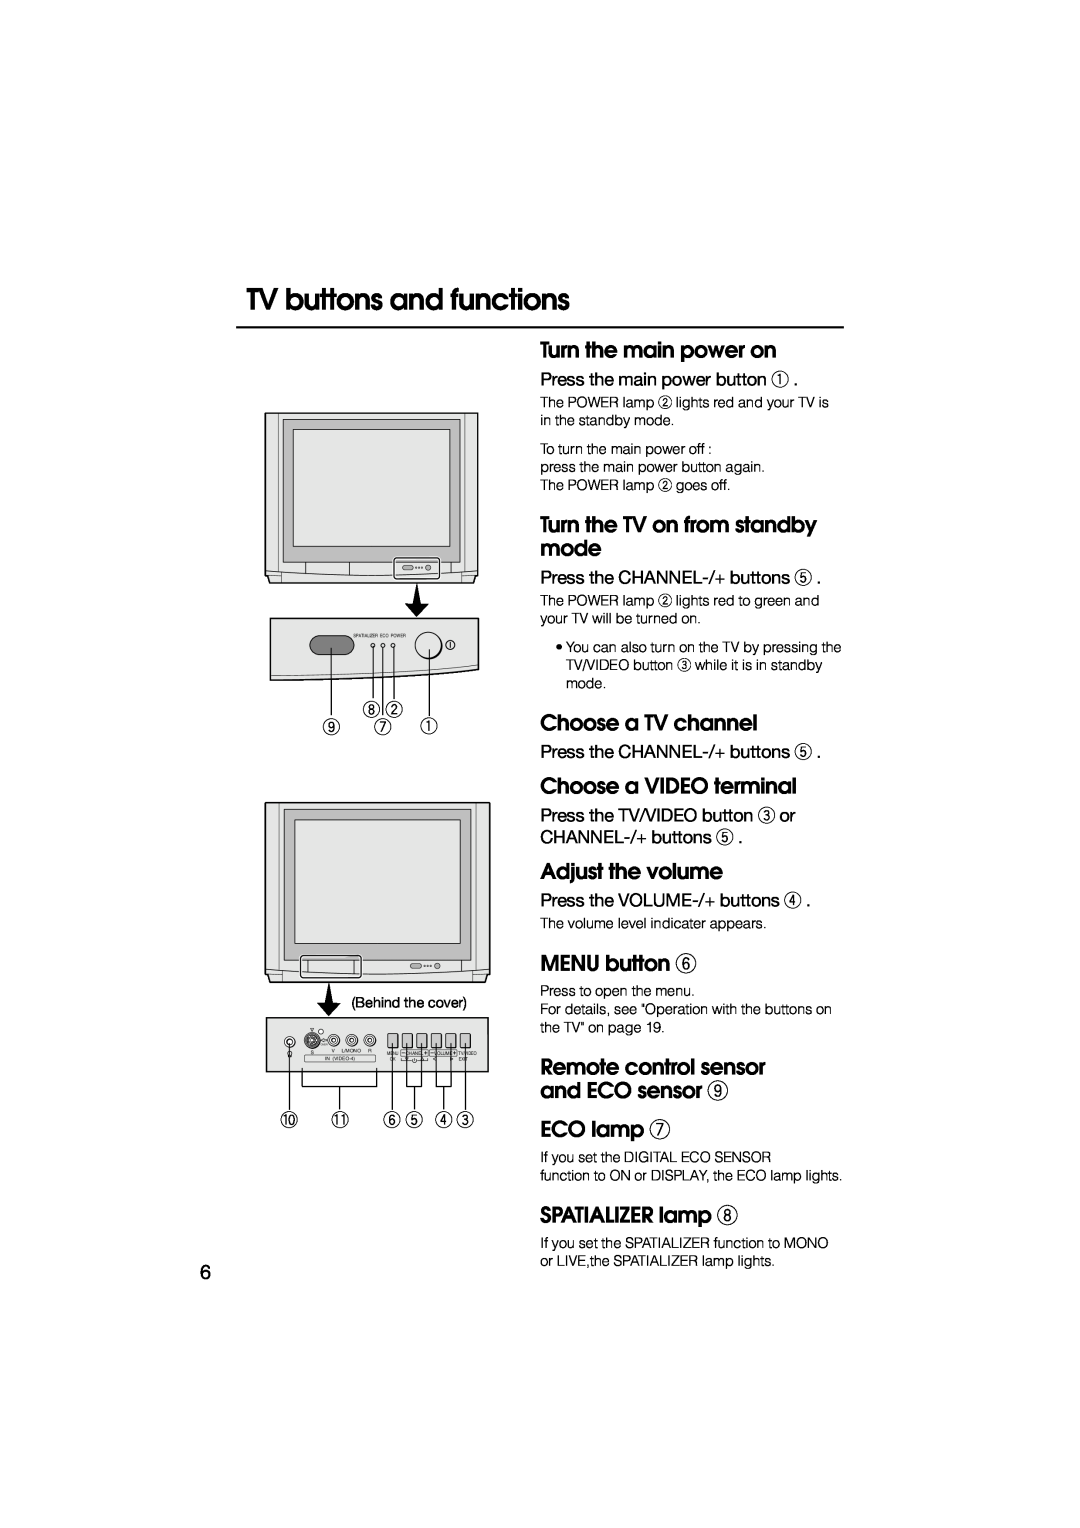 JVC HV-L34PRO TV buttons and functions, Turn the main power on, Turn the TV on from standby mode, Choose a TV channel 